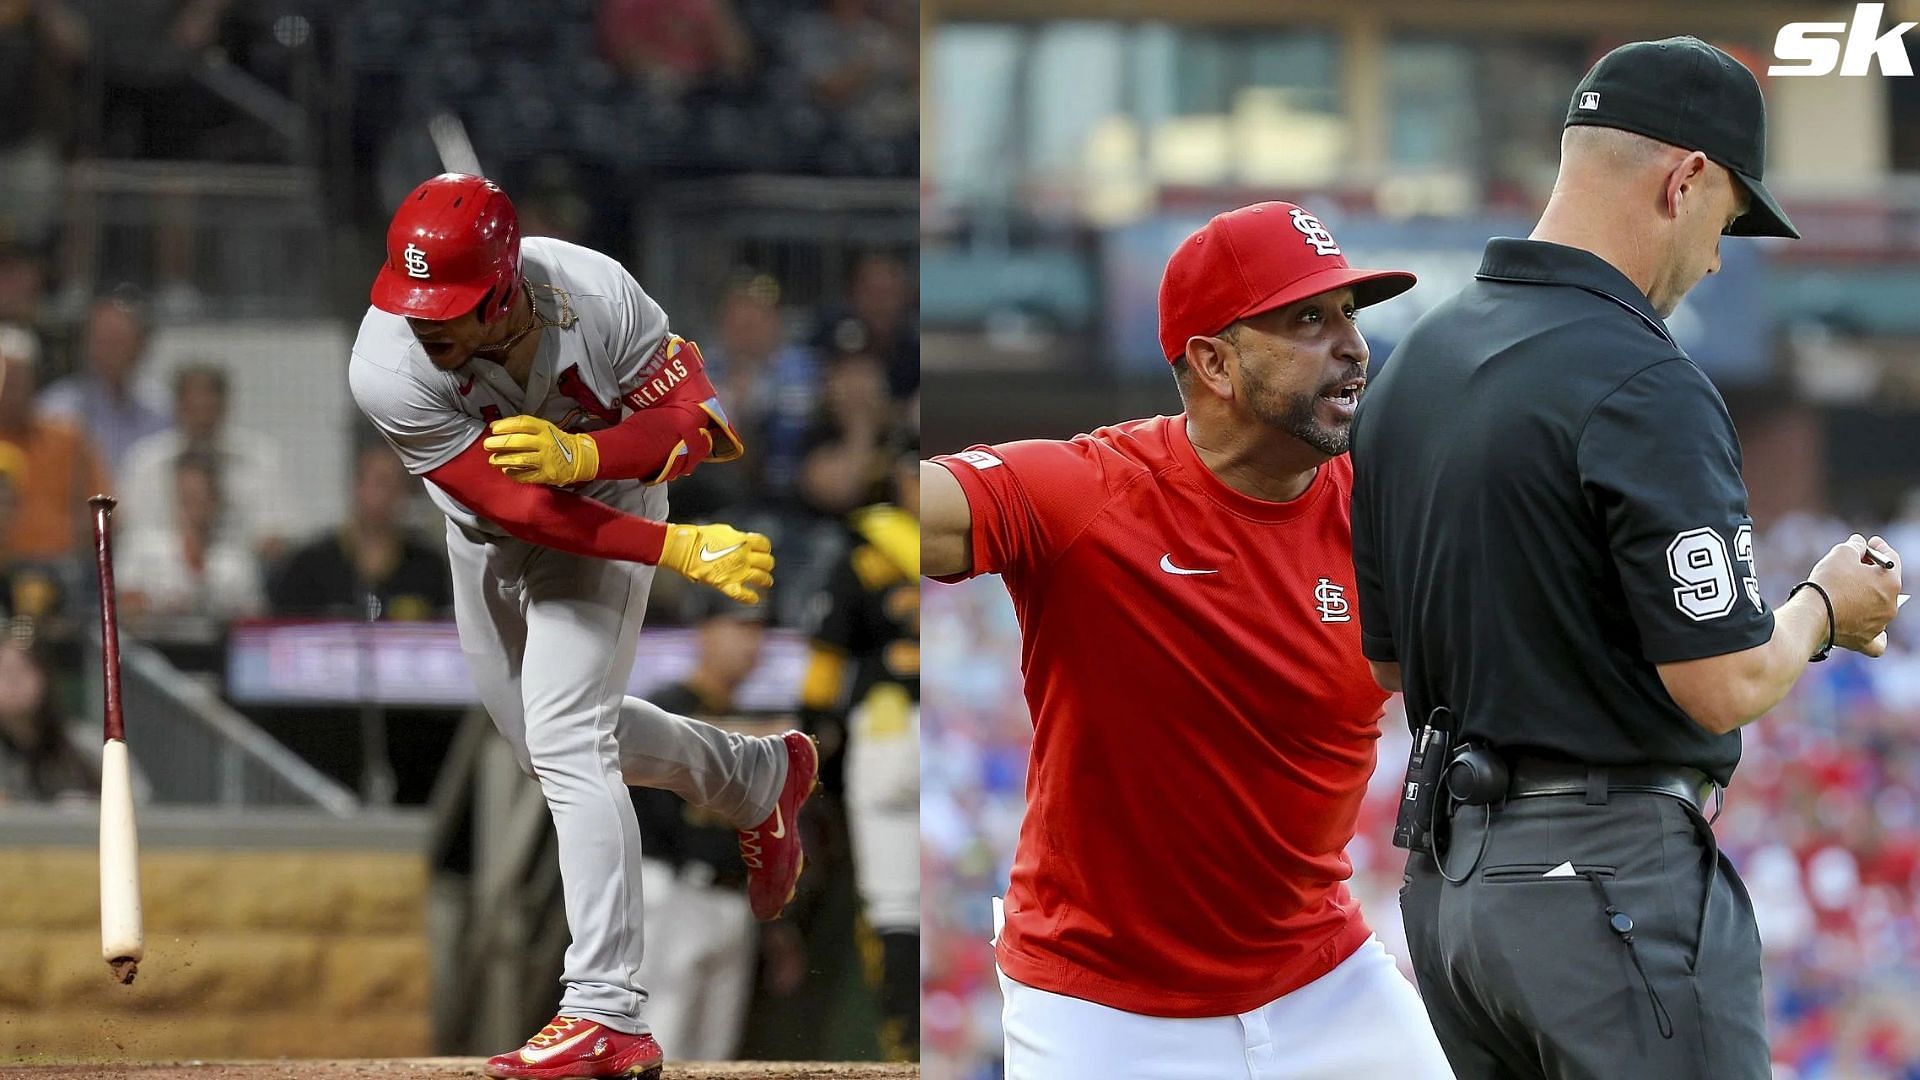 Why were Willson Contreras and Oli Marmol ejected? Cardinals catcher and  manager both booted from game vs Pirates